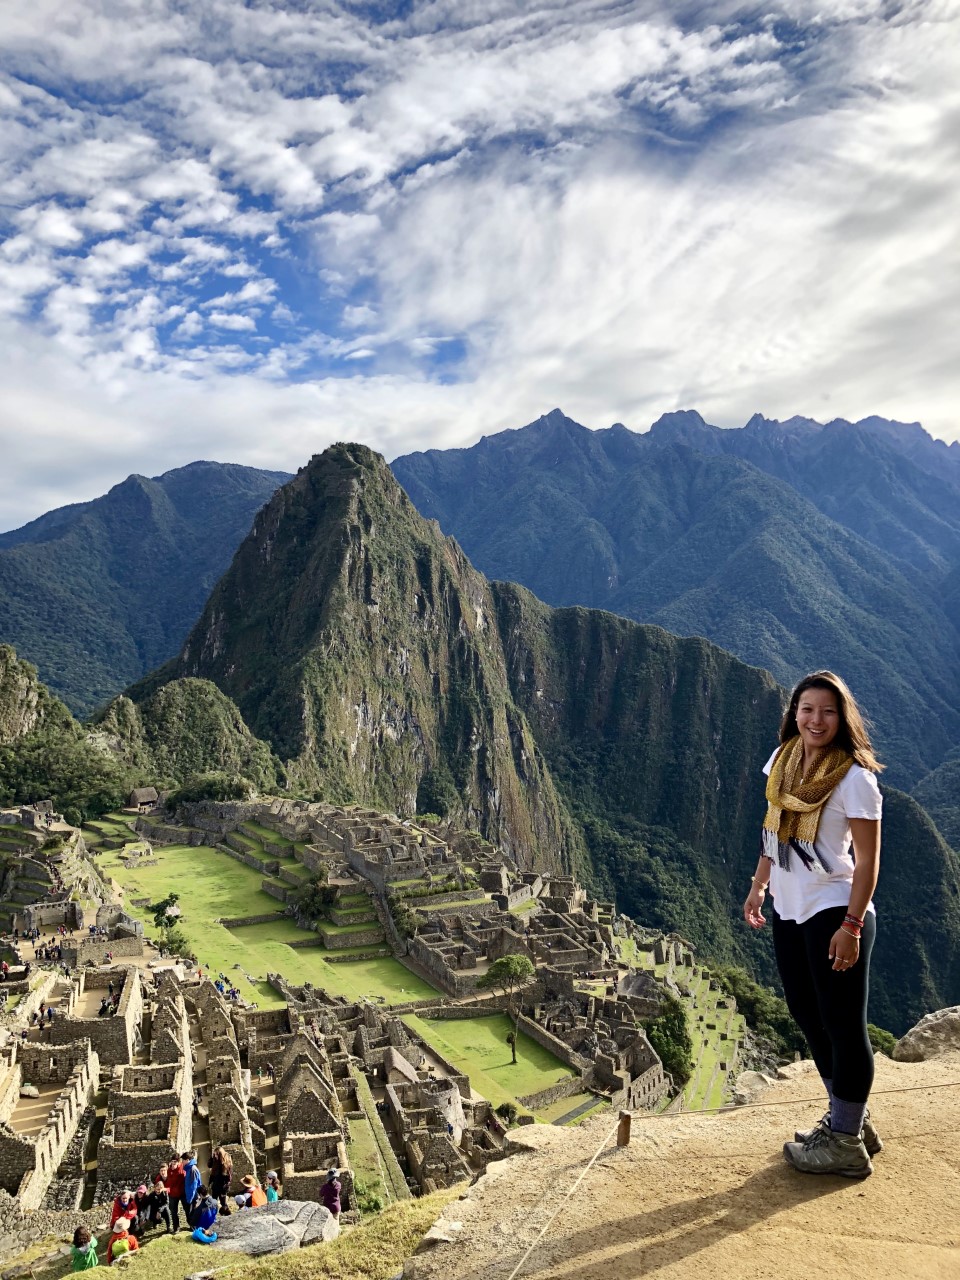 Kristin Lum-Tuong stands in front of a mountain.